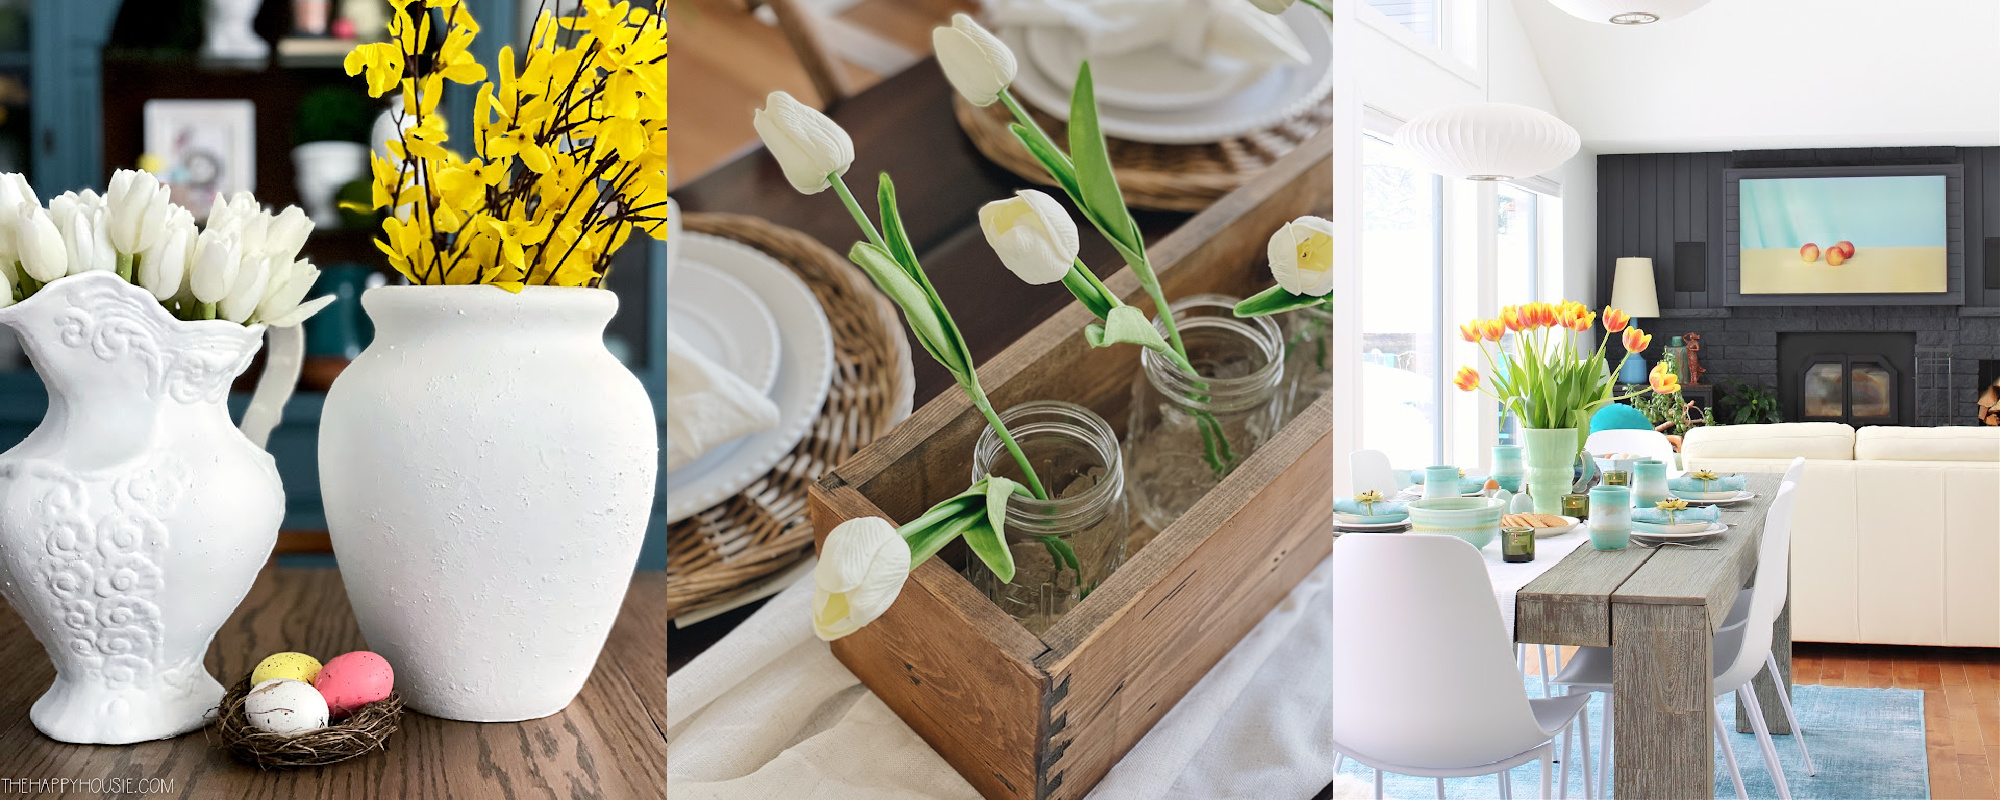 collage image of spring decorating ideas in the dining room